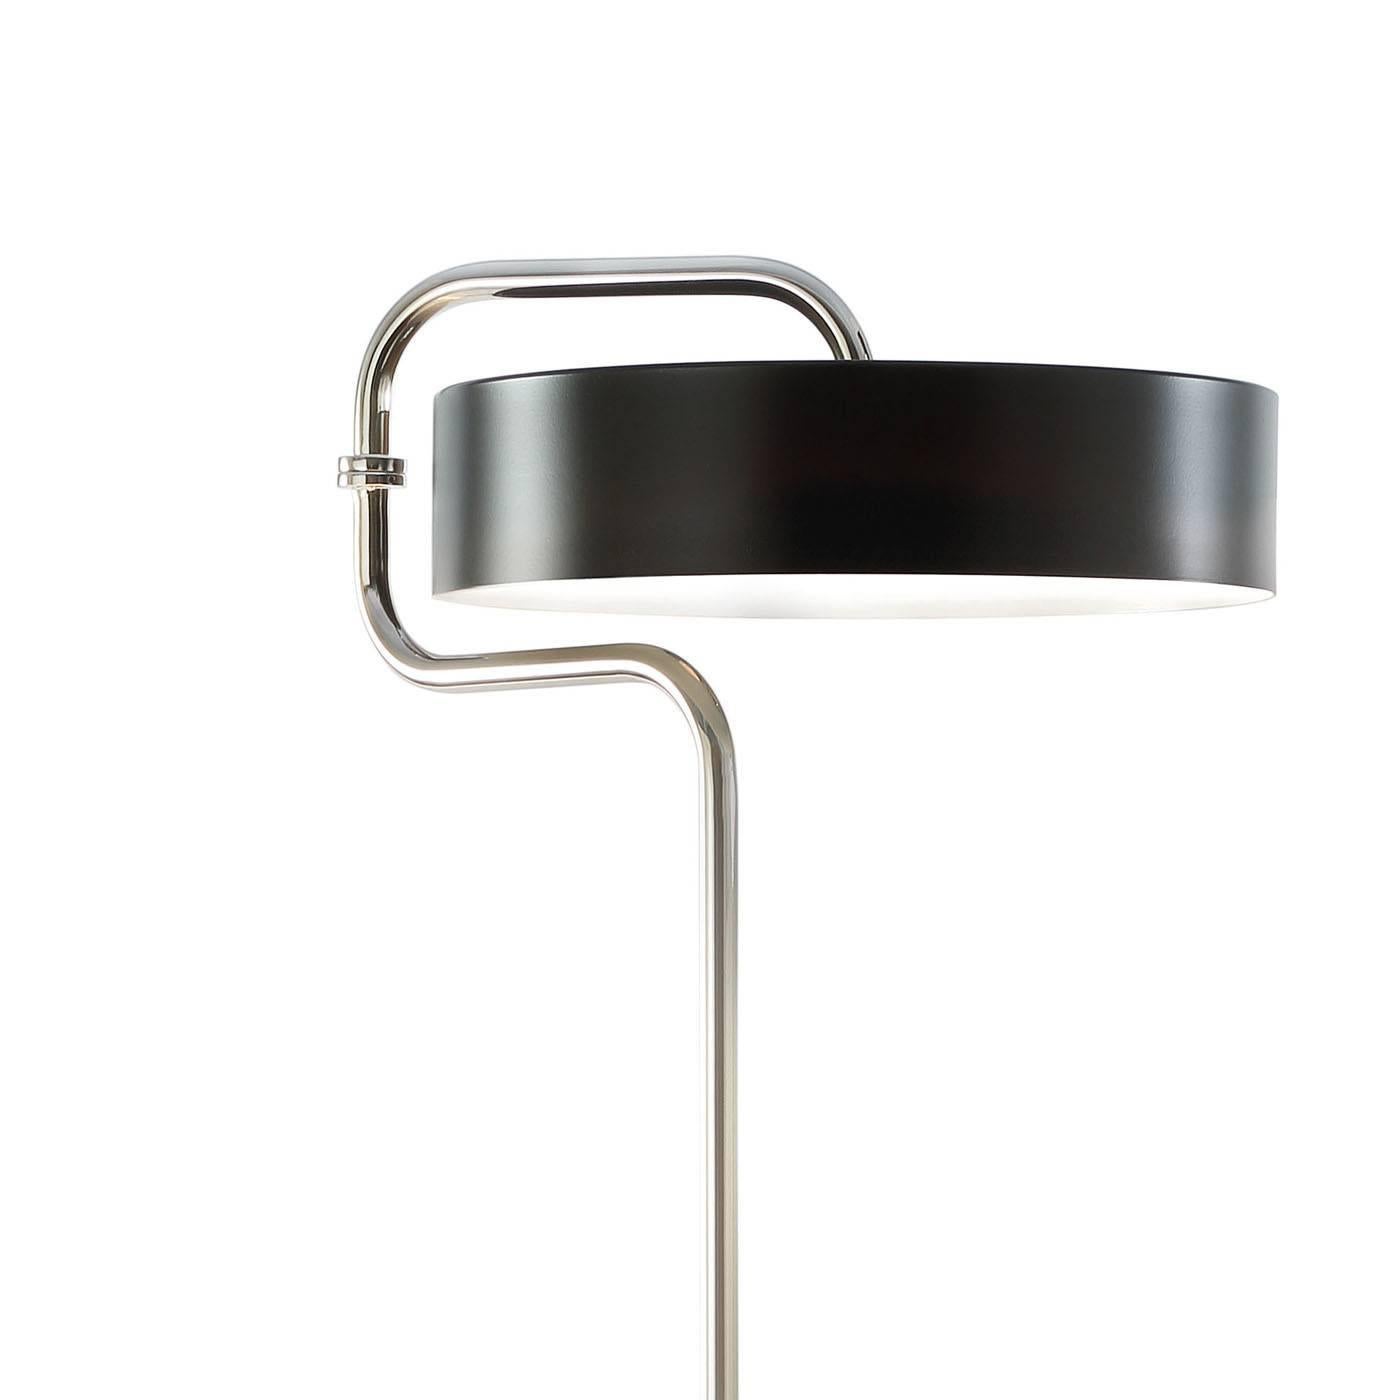 Elegant and modern, this floor lamp features geometric shapes and a sophisticated silhouette consisting of a round base supporting an elongated shaft that curves at the top to make room for the shade, in the shape of a large cylinder. The entire